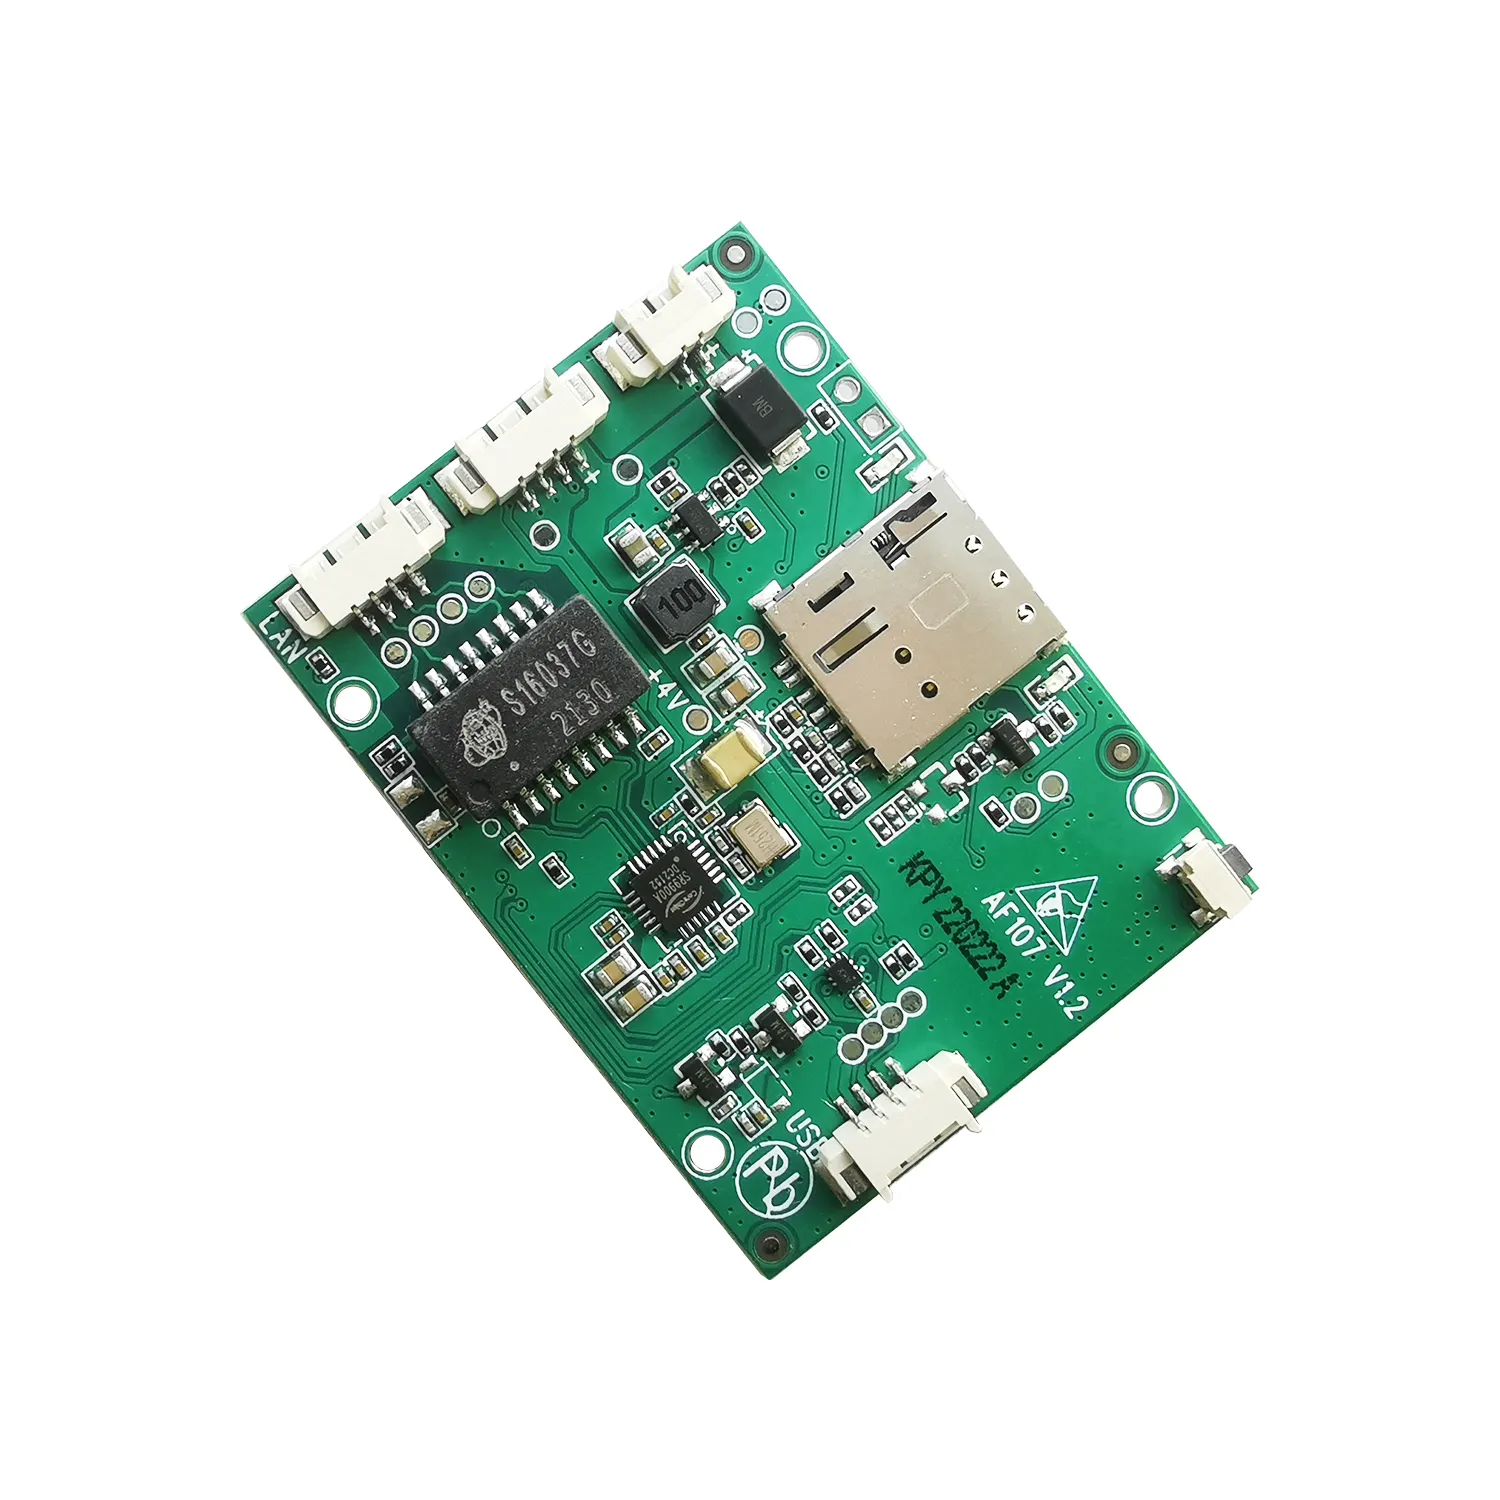 Factory Price 4G LTE Module Plug and Play Mini IOT Module with SIM Card Slot Wireless WIFI Hotspot Device